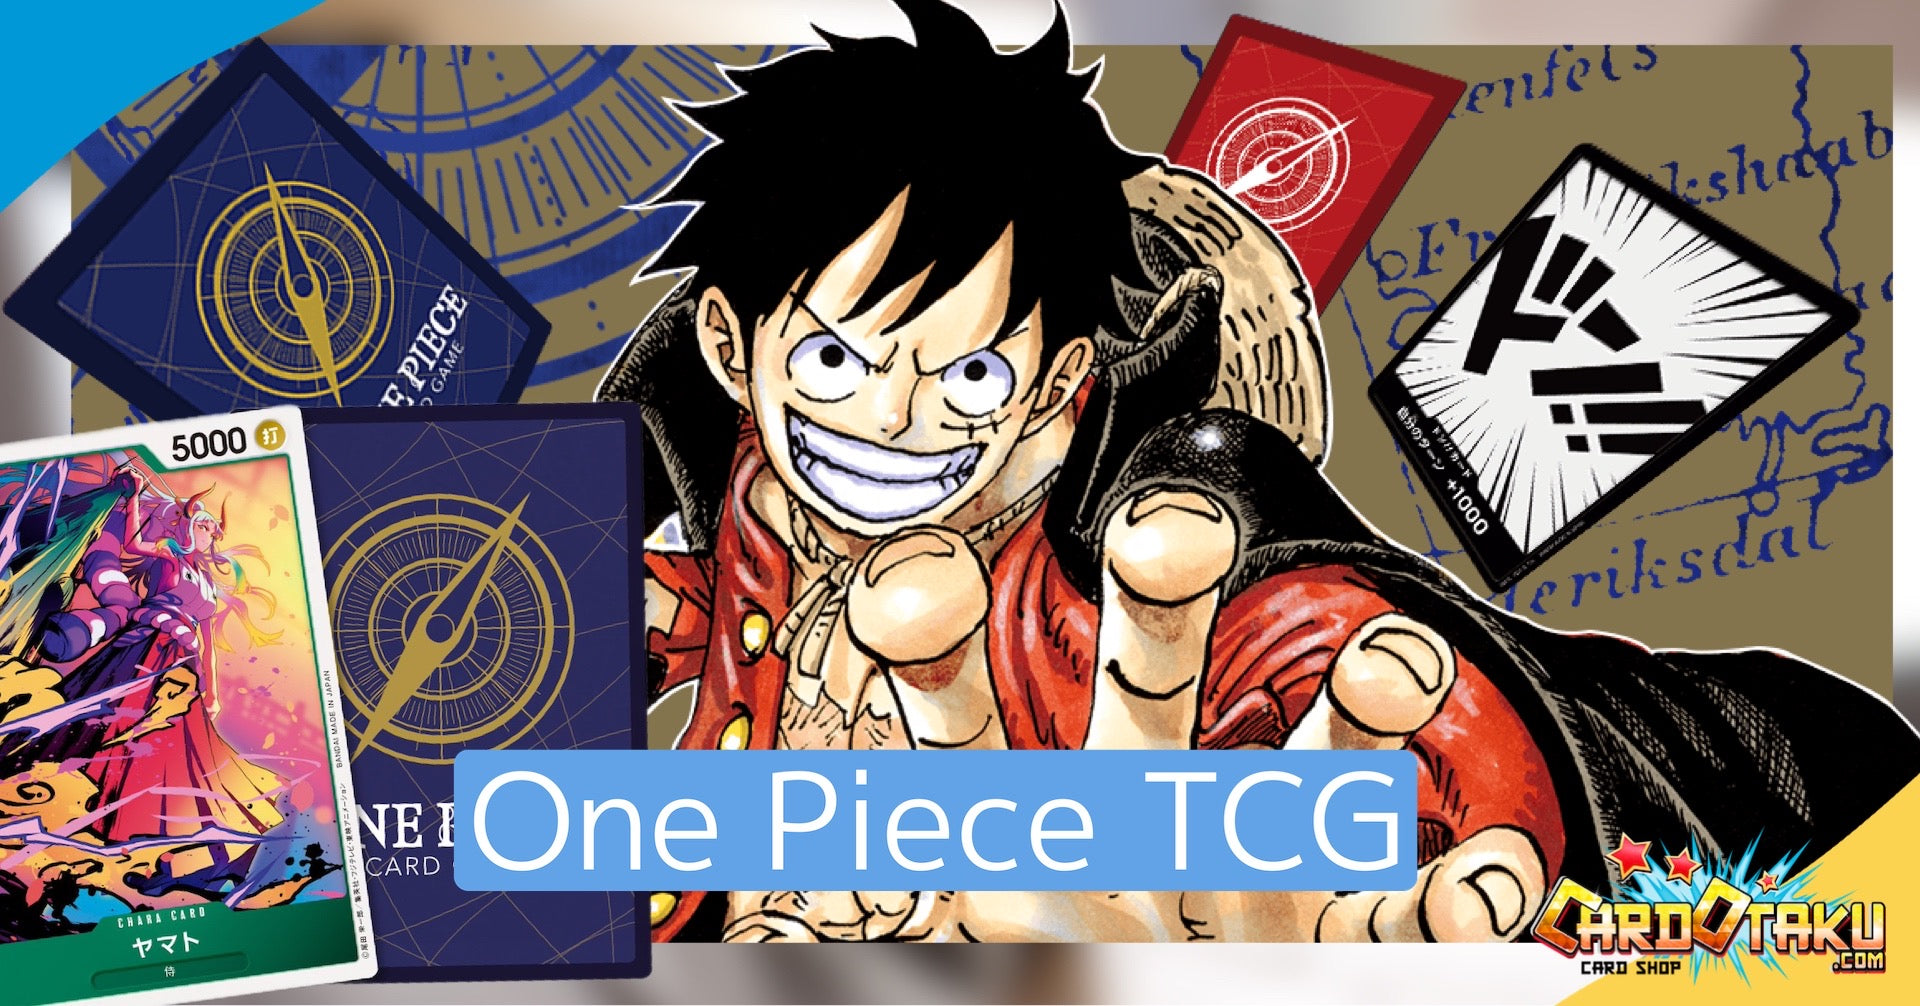 The new TCG One Piece has arrived and here is all the information you need to know :